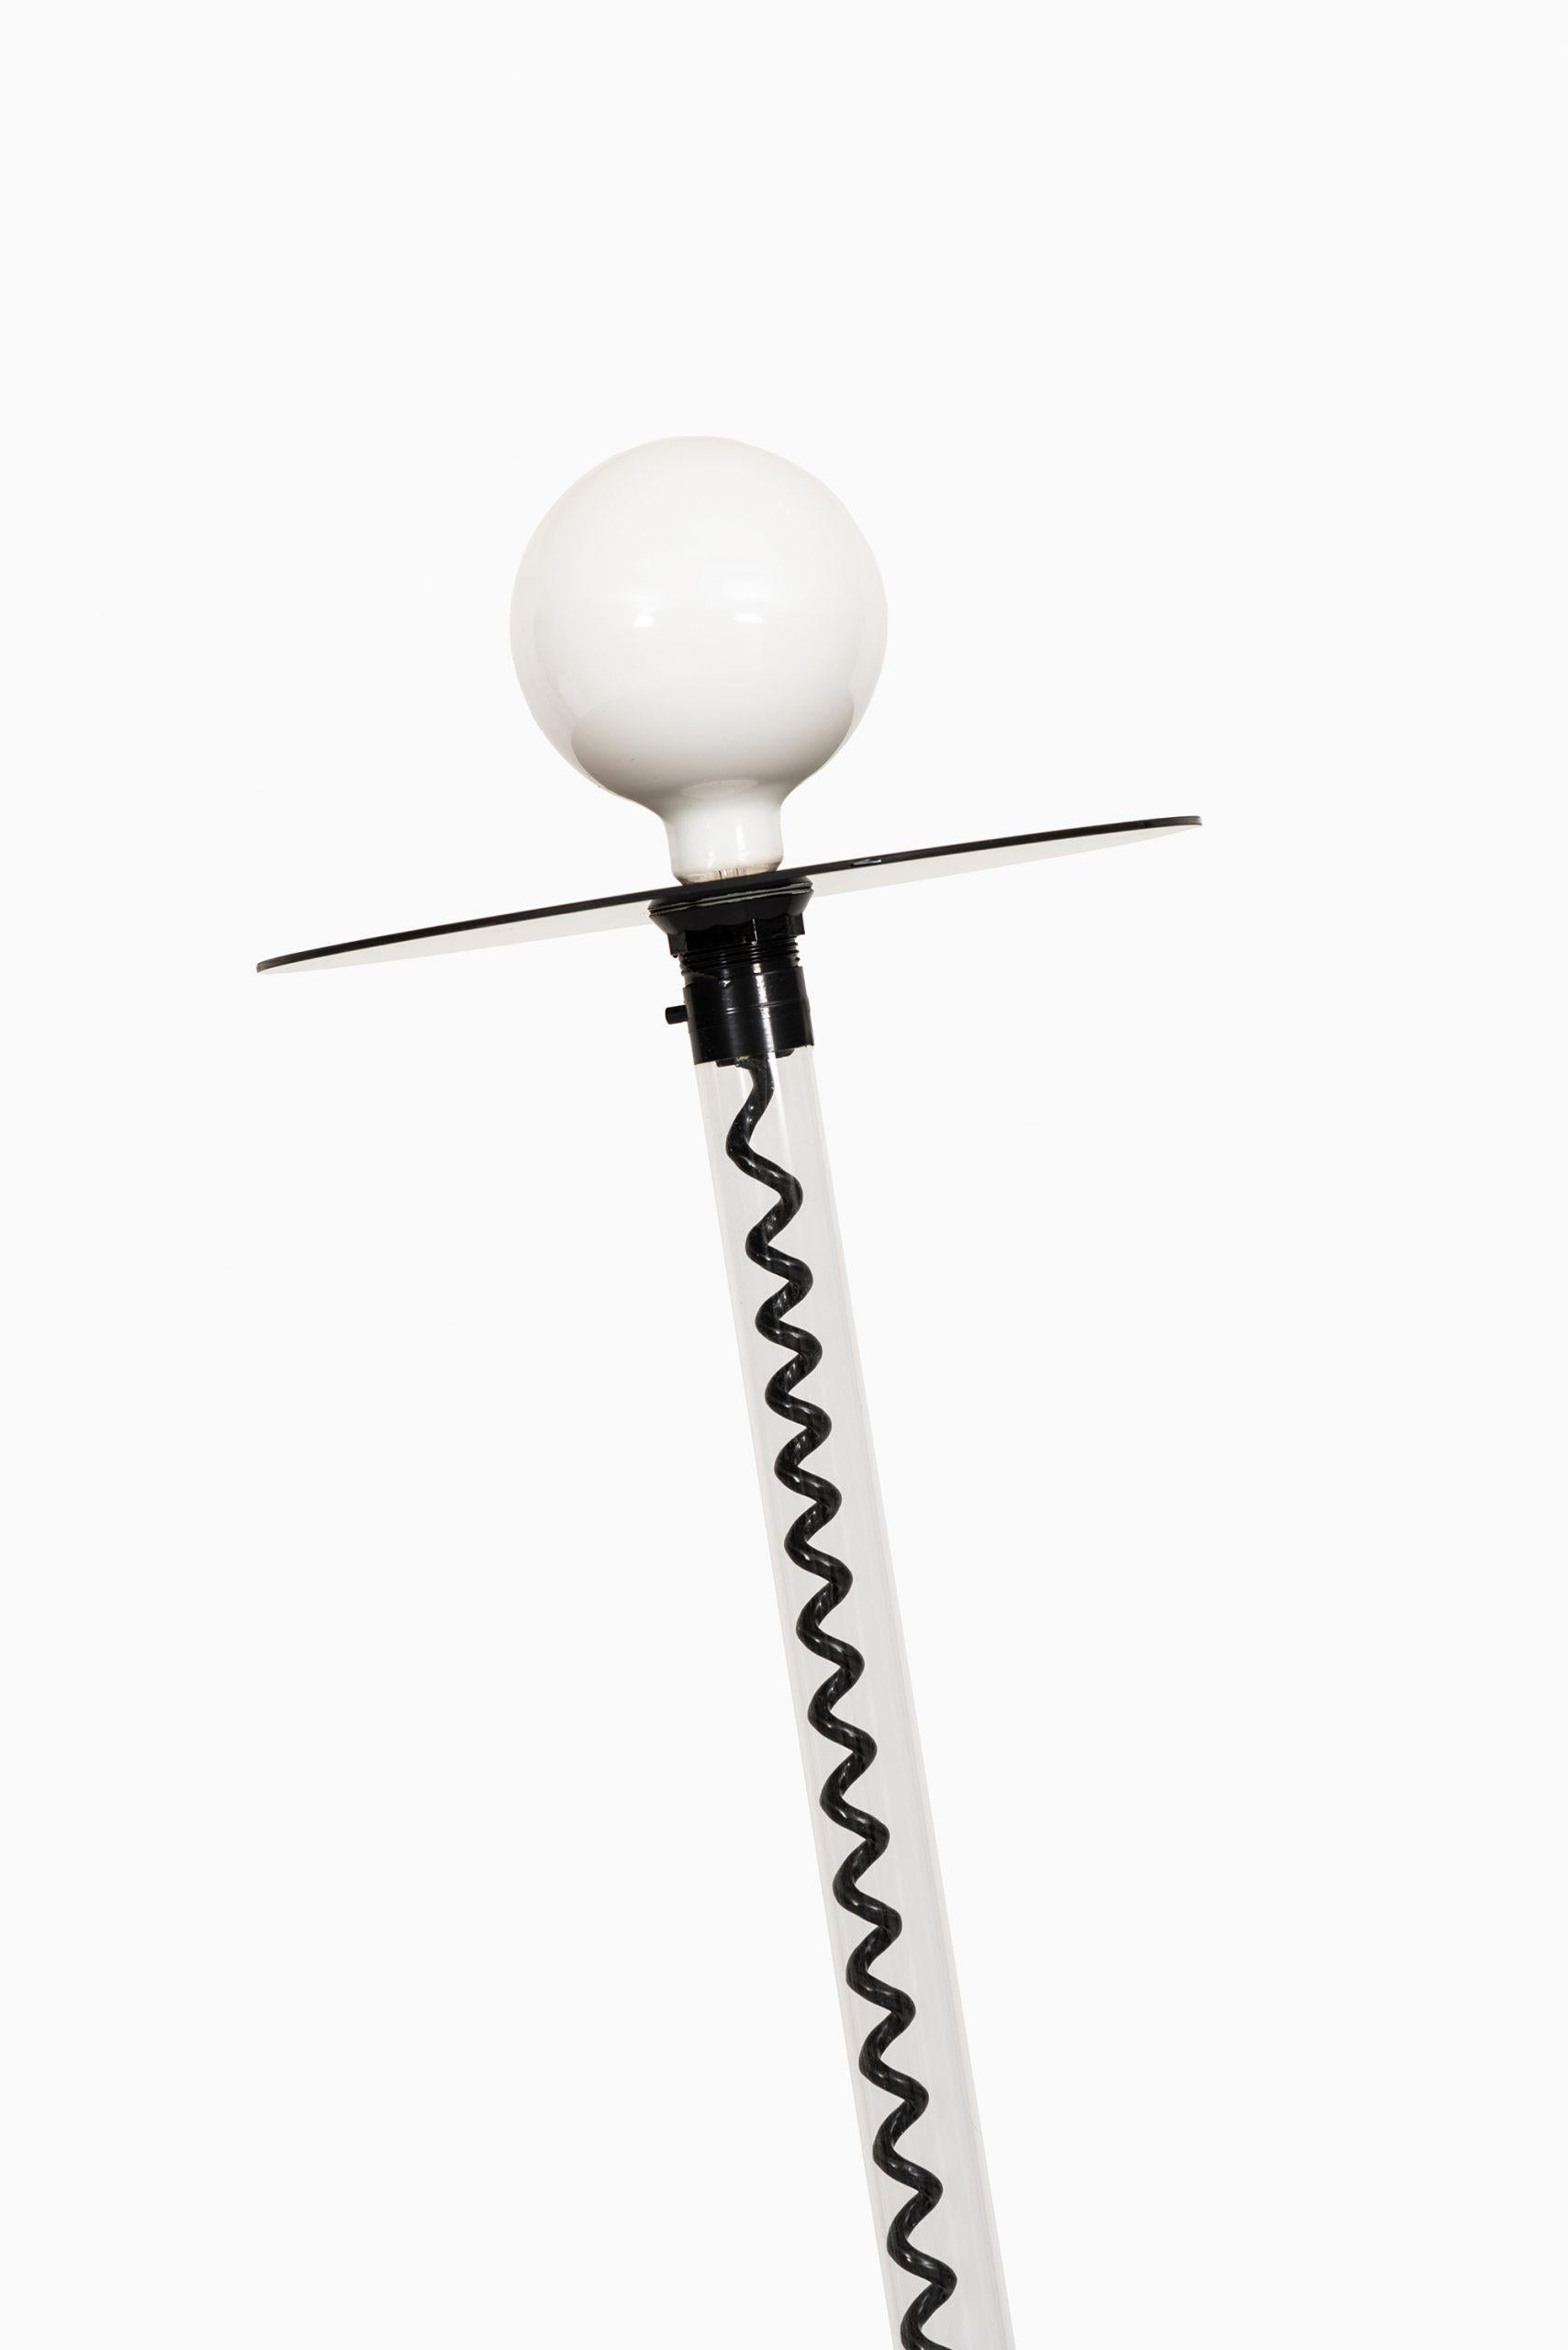 Floor lamp in the manner of the Memphis group in Italy. Probably produced in Italy.